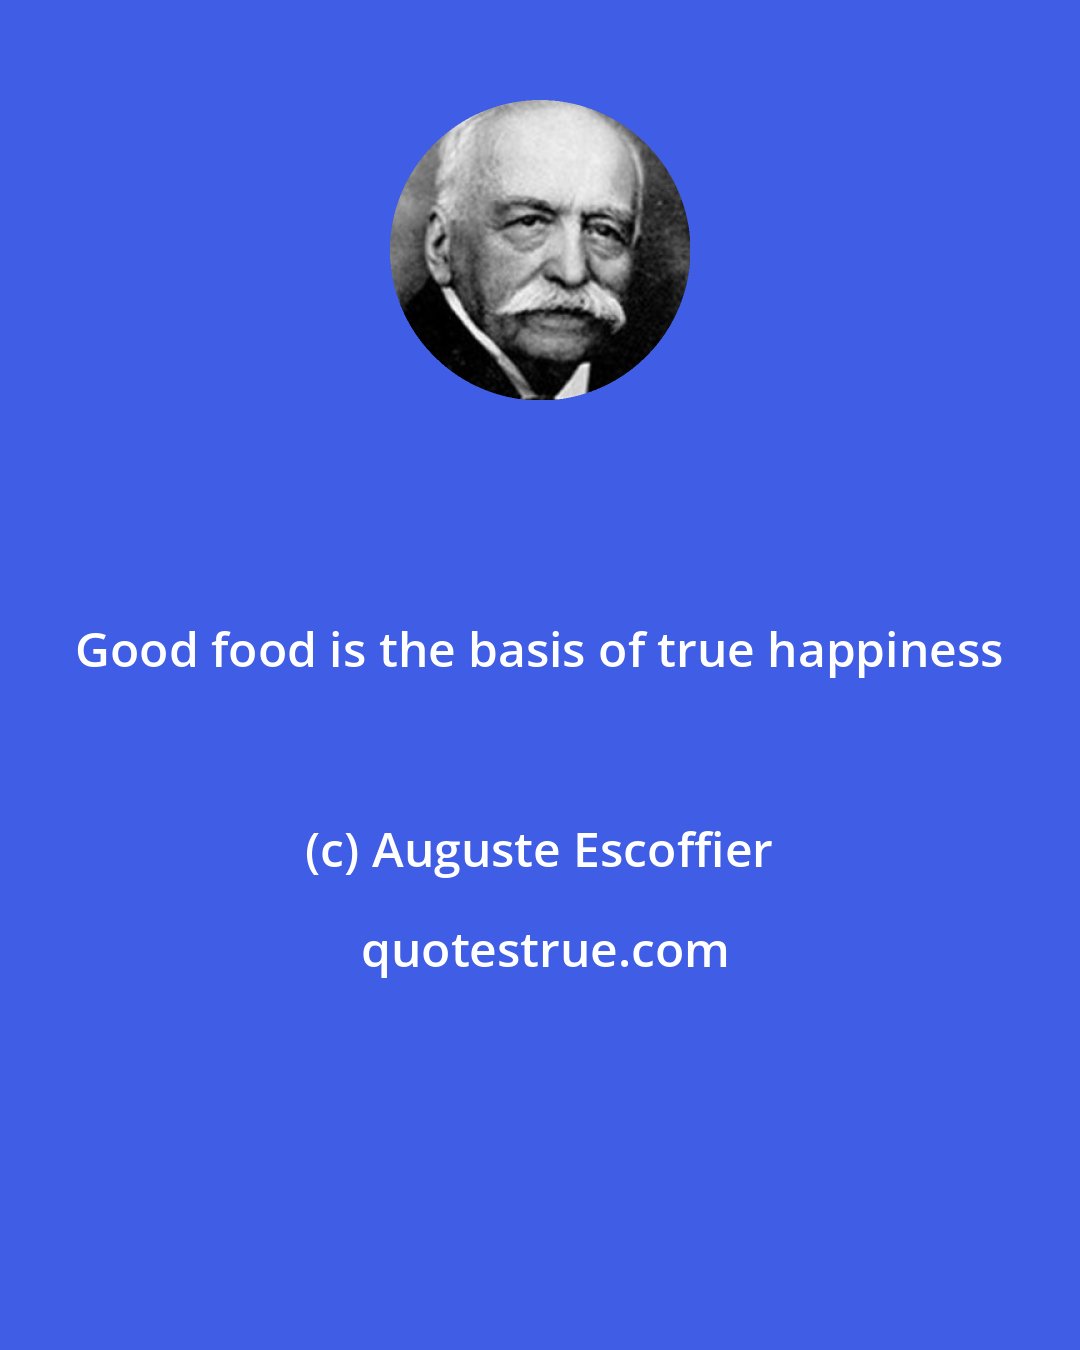 Auguste Escoffier: Good food is the basis of true happiness